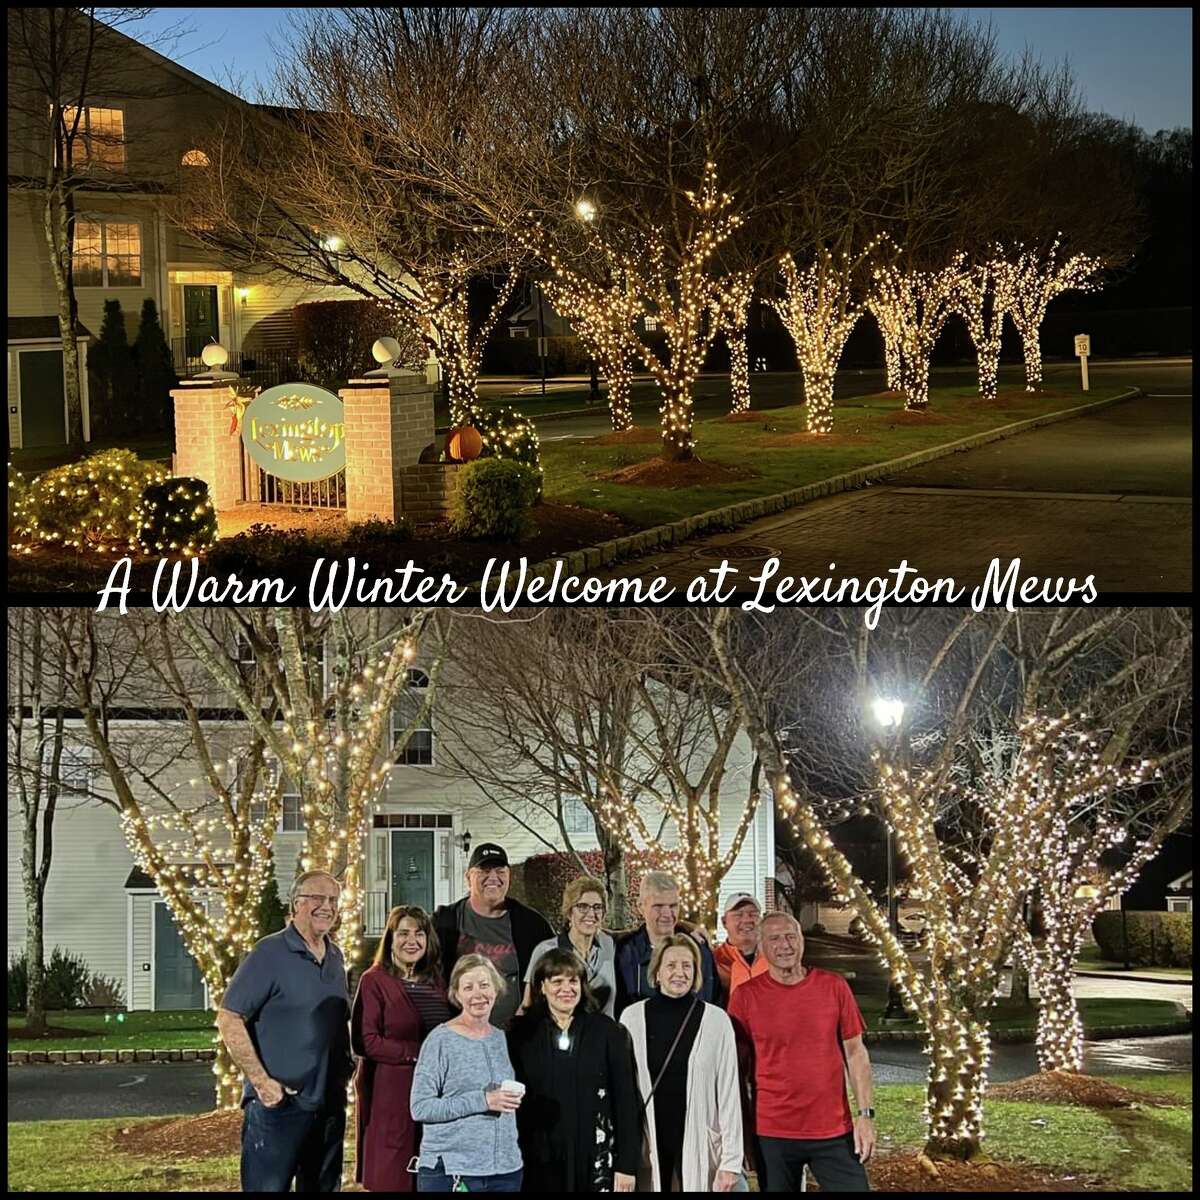 The Lexington Mews community held its first annual tree lighting, “A Warm Winter Welcome,” on the first weekend of November.